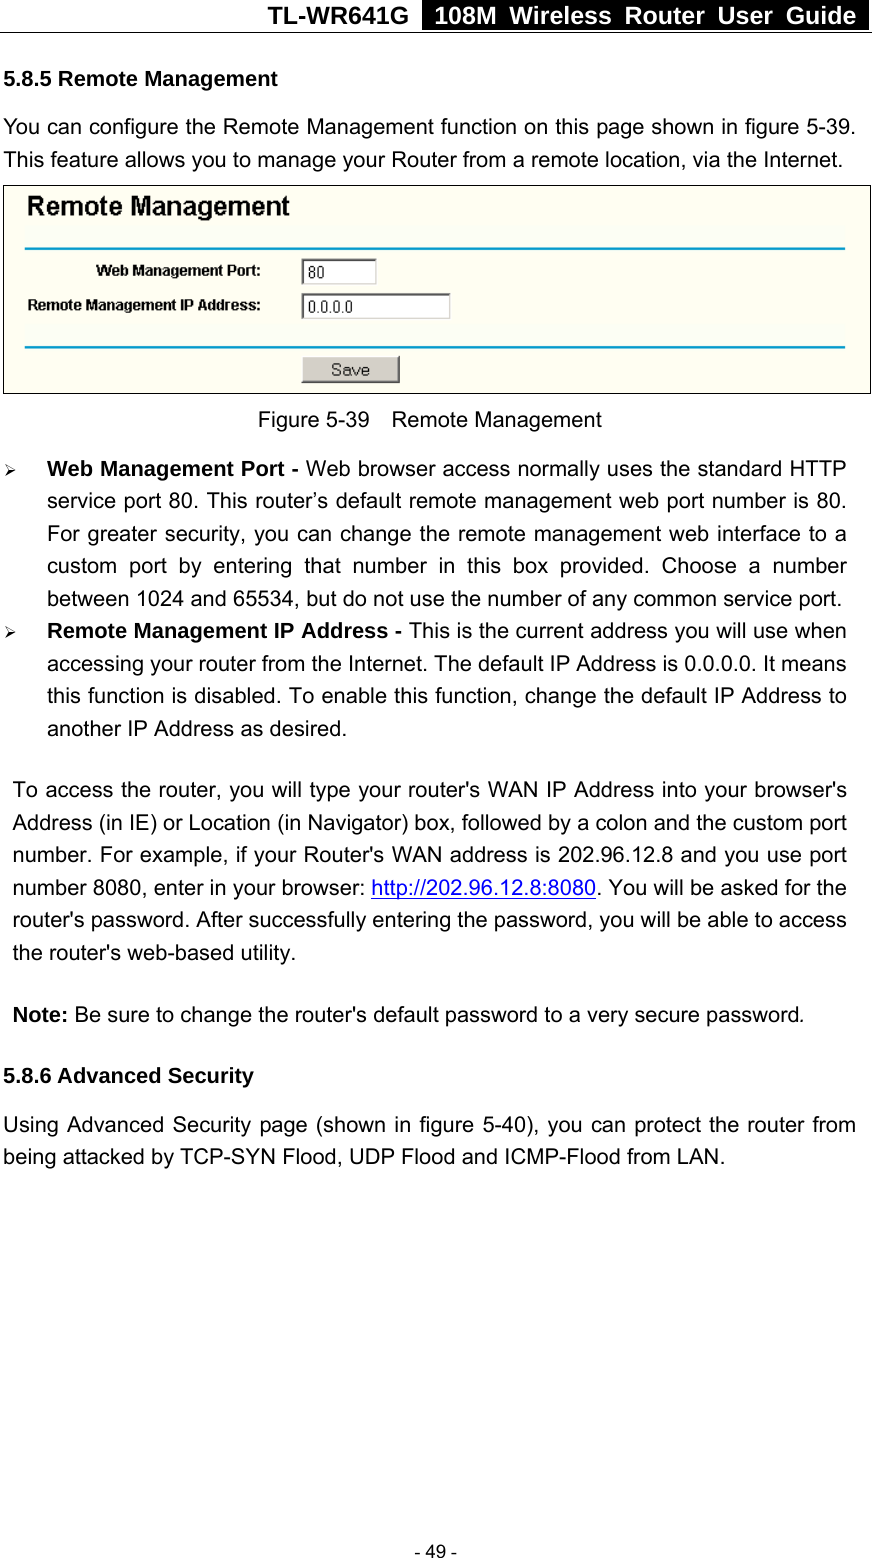 TL-WR641G   108M Wireless Router User Guide  5.8.5 Remote Management You can configure the Remote Management function on this page shown in figure 5-39. This feature allows you to manage your Router from a remote location, via the Internet.   Figure 5-39  Remote Management ¾ Web Management Port - Web browser access normally uses the standard HTTP service port 80. This router’s default remote management web port number is 80. For greater security, you can change the remote management web interface to a custom port by entering that number in this box provided. Choose a number between 1024 and 65534, but do not use the number of any common service port. ¾ Remote Management IP Address - This is the current address you will use when accessing your router from the Internet. The default IP Address is 0.0.0.0. It means this function is disabled. To enable this function, change the default IP Address to another IP Address as desired.   To access the router, you will type your router&apos;s WAN IP Address into your browser&apos;s Address (in IE) or Location (in Navigator) box, followed by a colon and the custom port number. For example, if your Router&apos;s WAN address is 202.96.12.8 and you use port number 8080, enter in your browser: http://202.96.12.8:8080. You will be asked for the router&apos;s password. After successfully entering the password, you will be able to access the router&apos;s web-based utility. Note: Be sure to change the router&apos;s default password to a very secure password. 5.8.6 Advanced Security Using Advanced Security page (shown in figure 5-40), you can protect the router from being attacked by TCP-SYN Flood, UDP Flood and ICMP-Flood from LAN.  - 49 - 